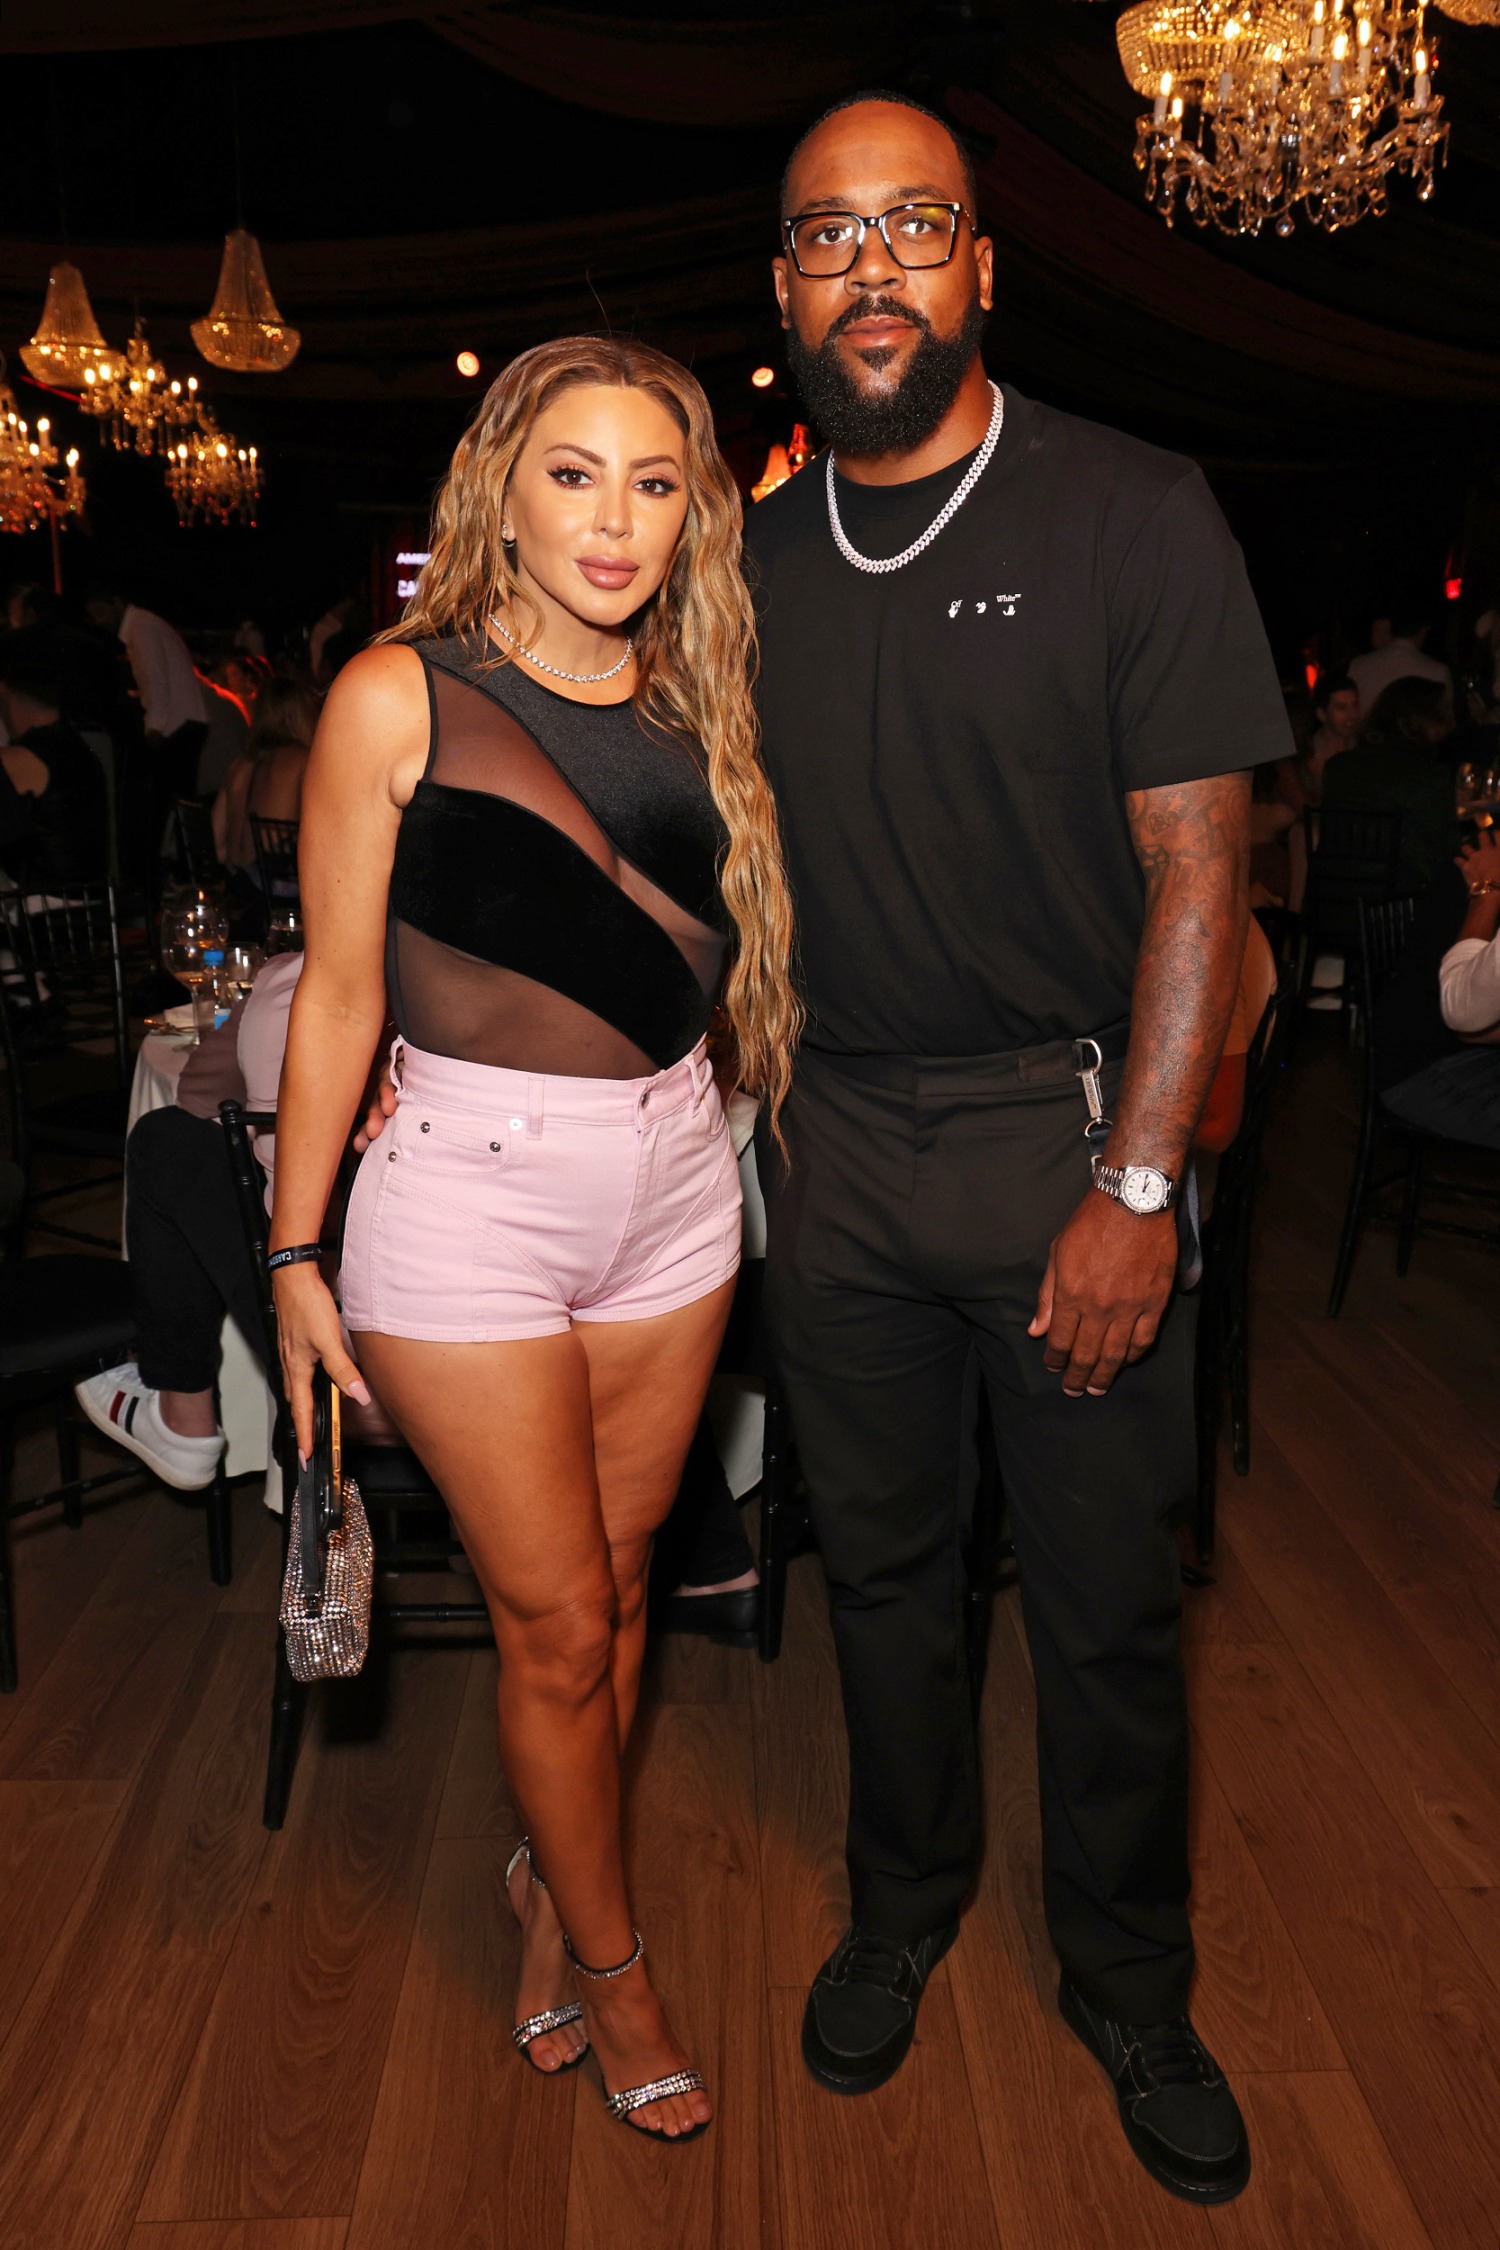 Marcus Jordan and Larsa Pippen Split: What She Shared About Their Breakup